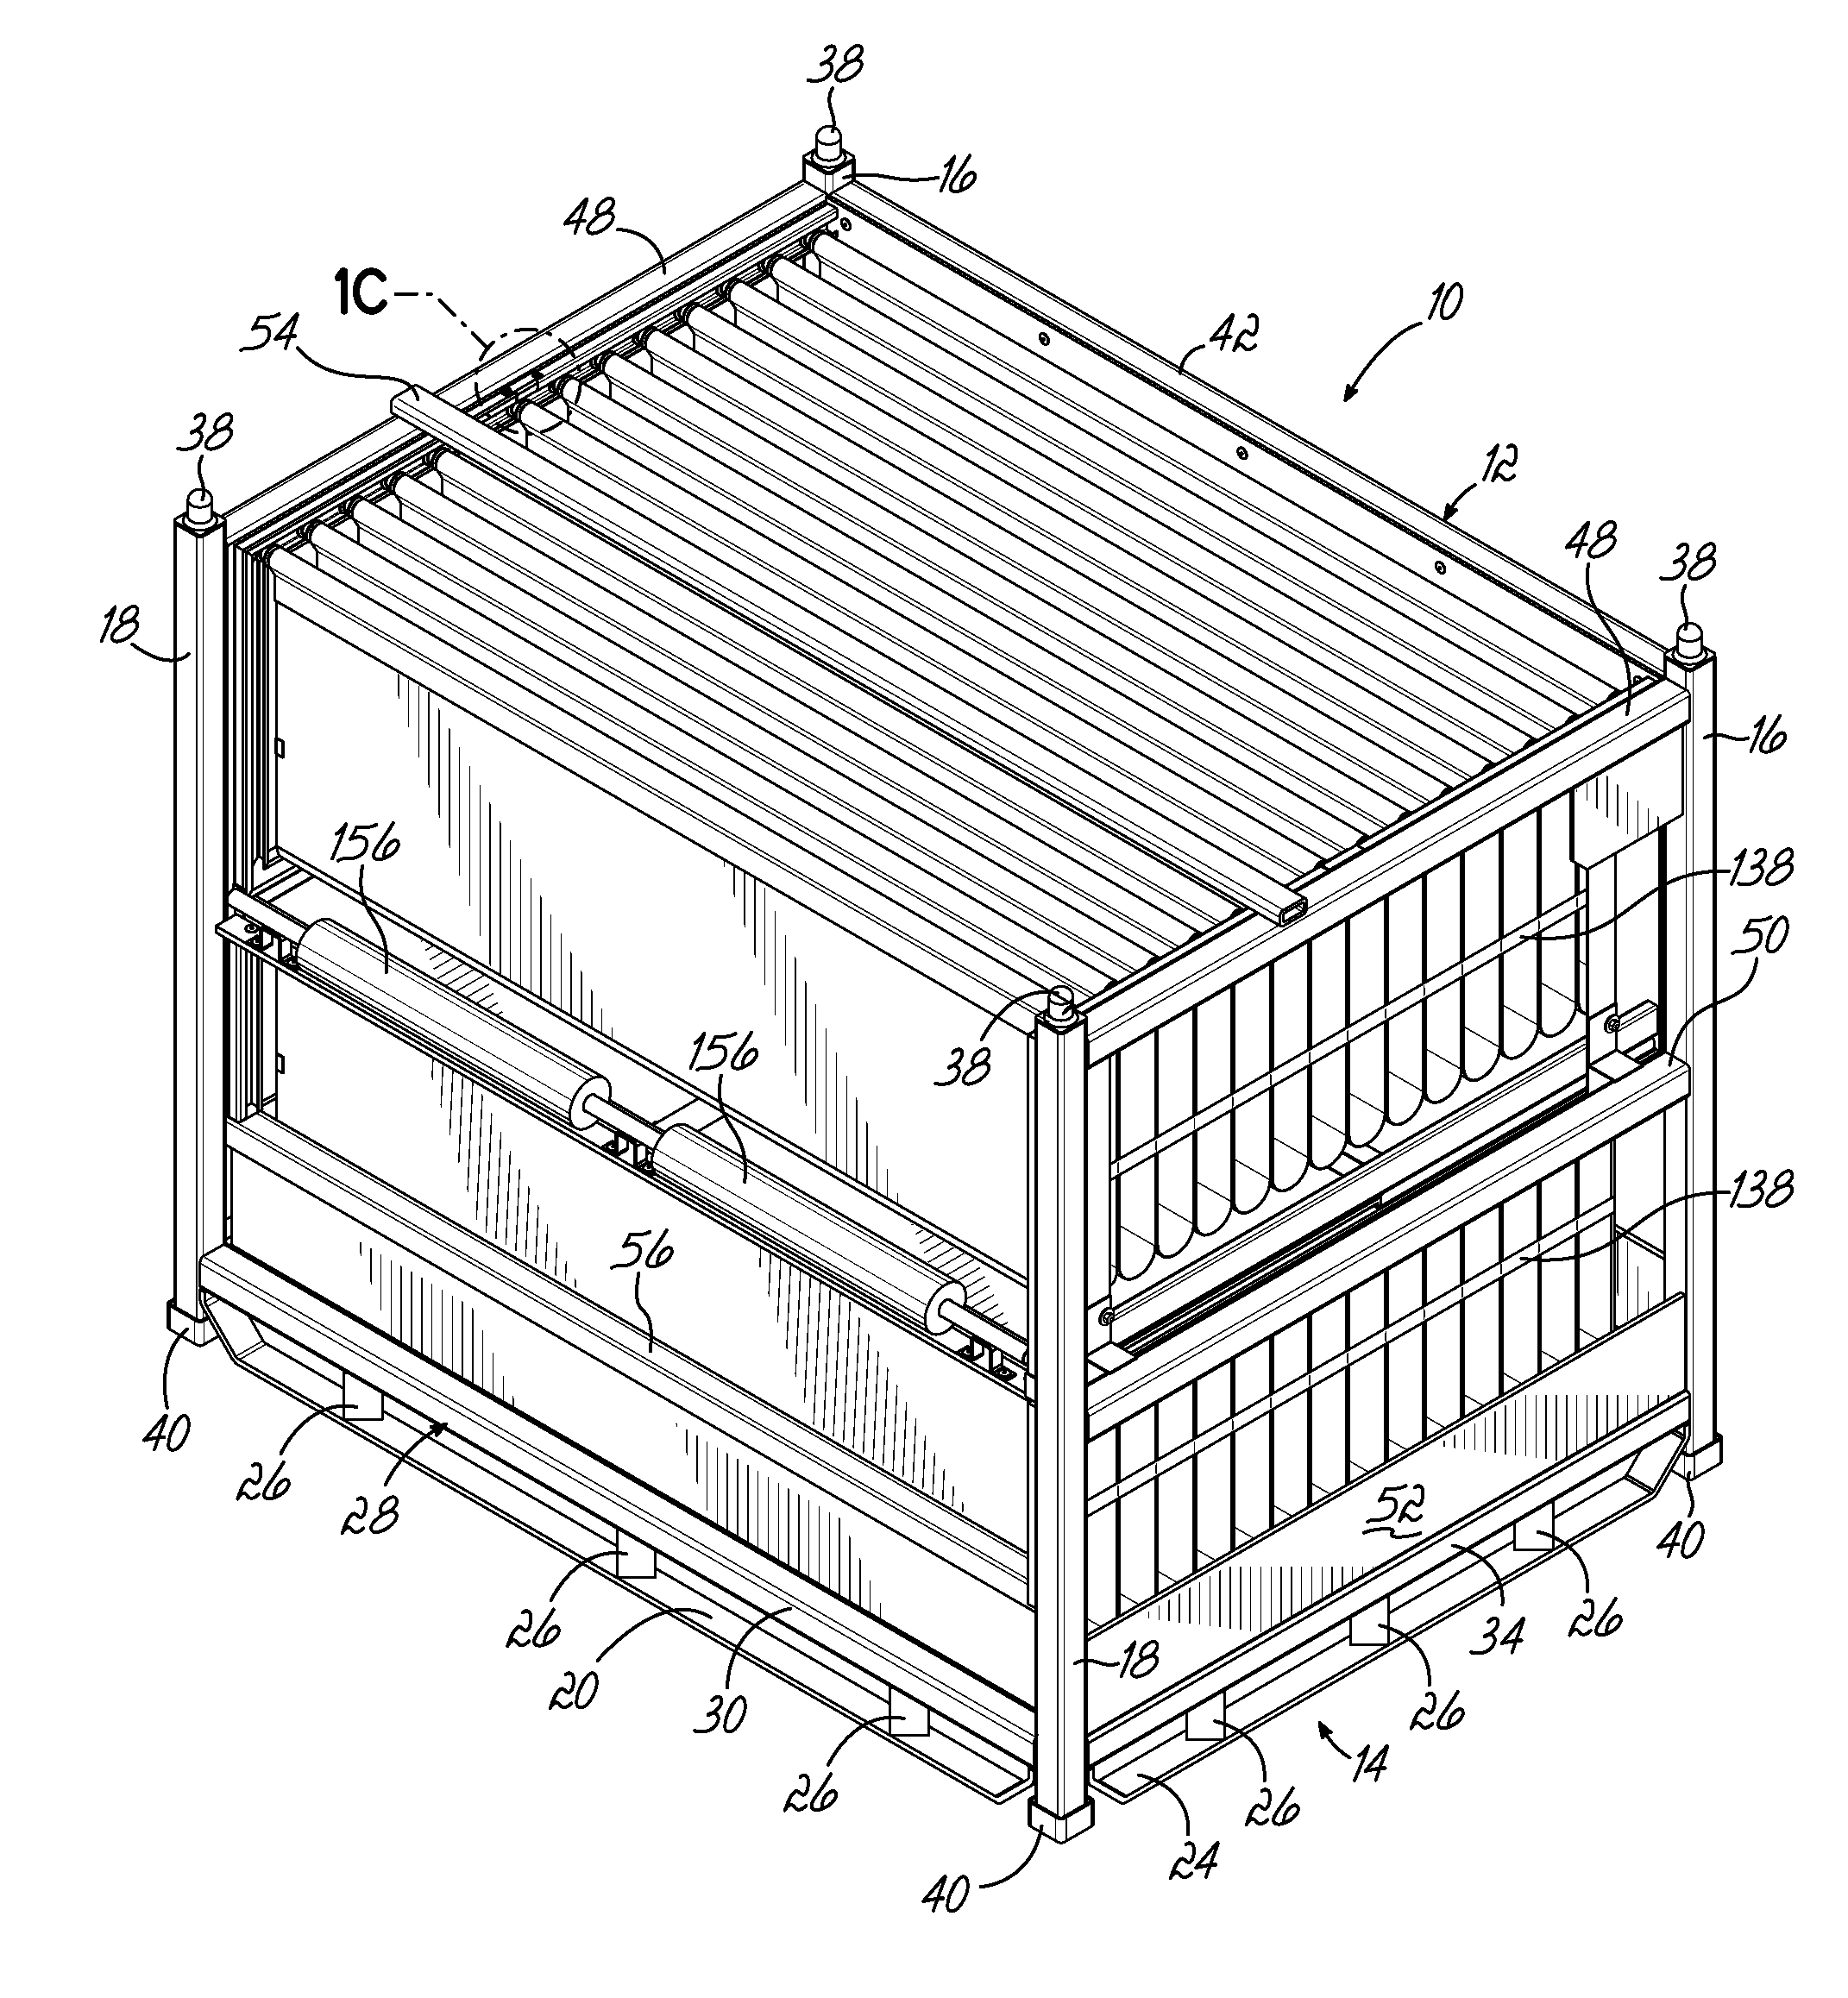 Container Having Non-Linear and Linear Tracks For Supporting Movable Dunnage